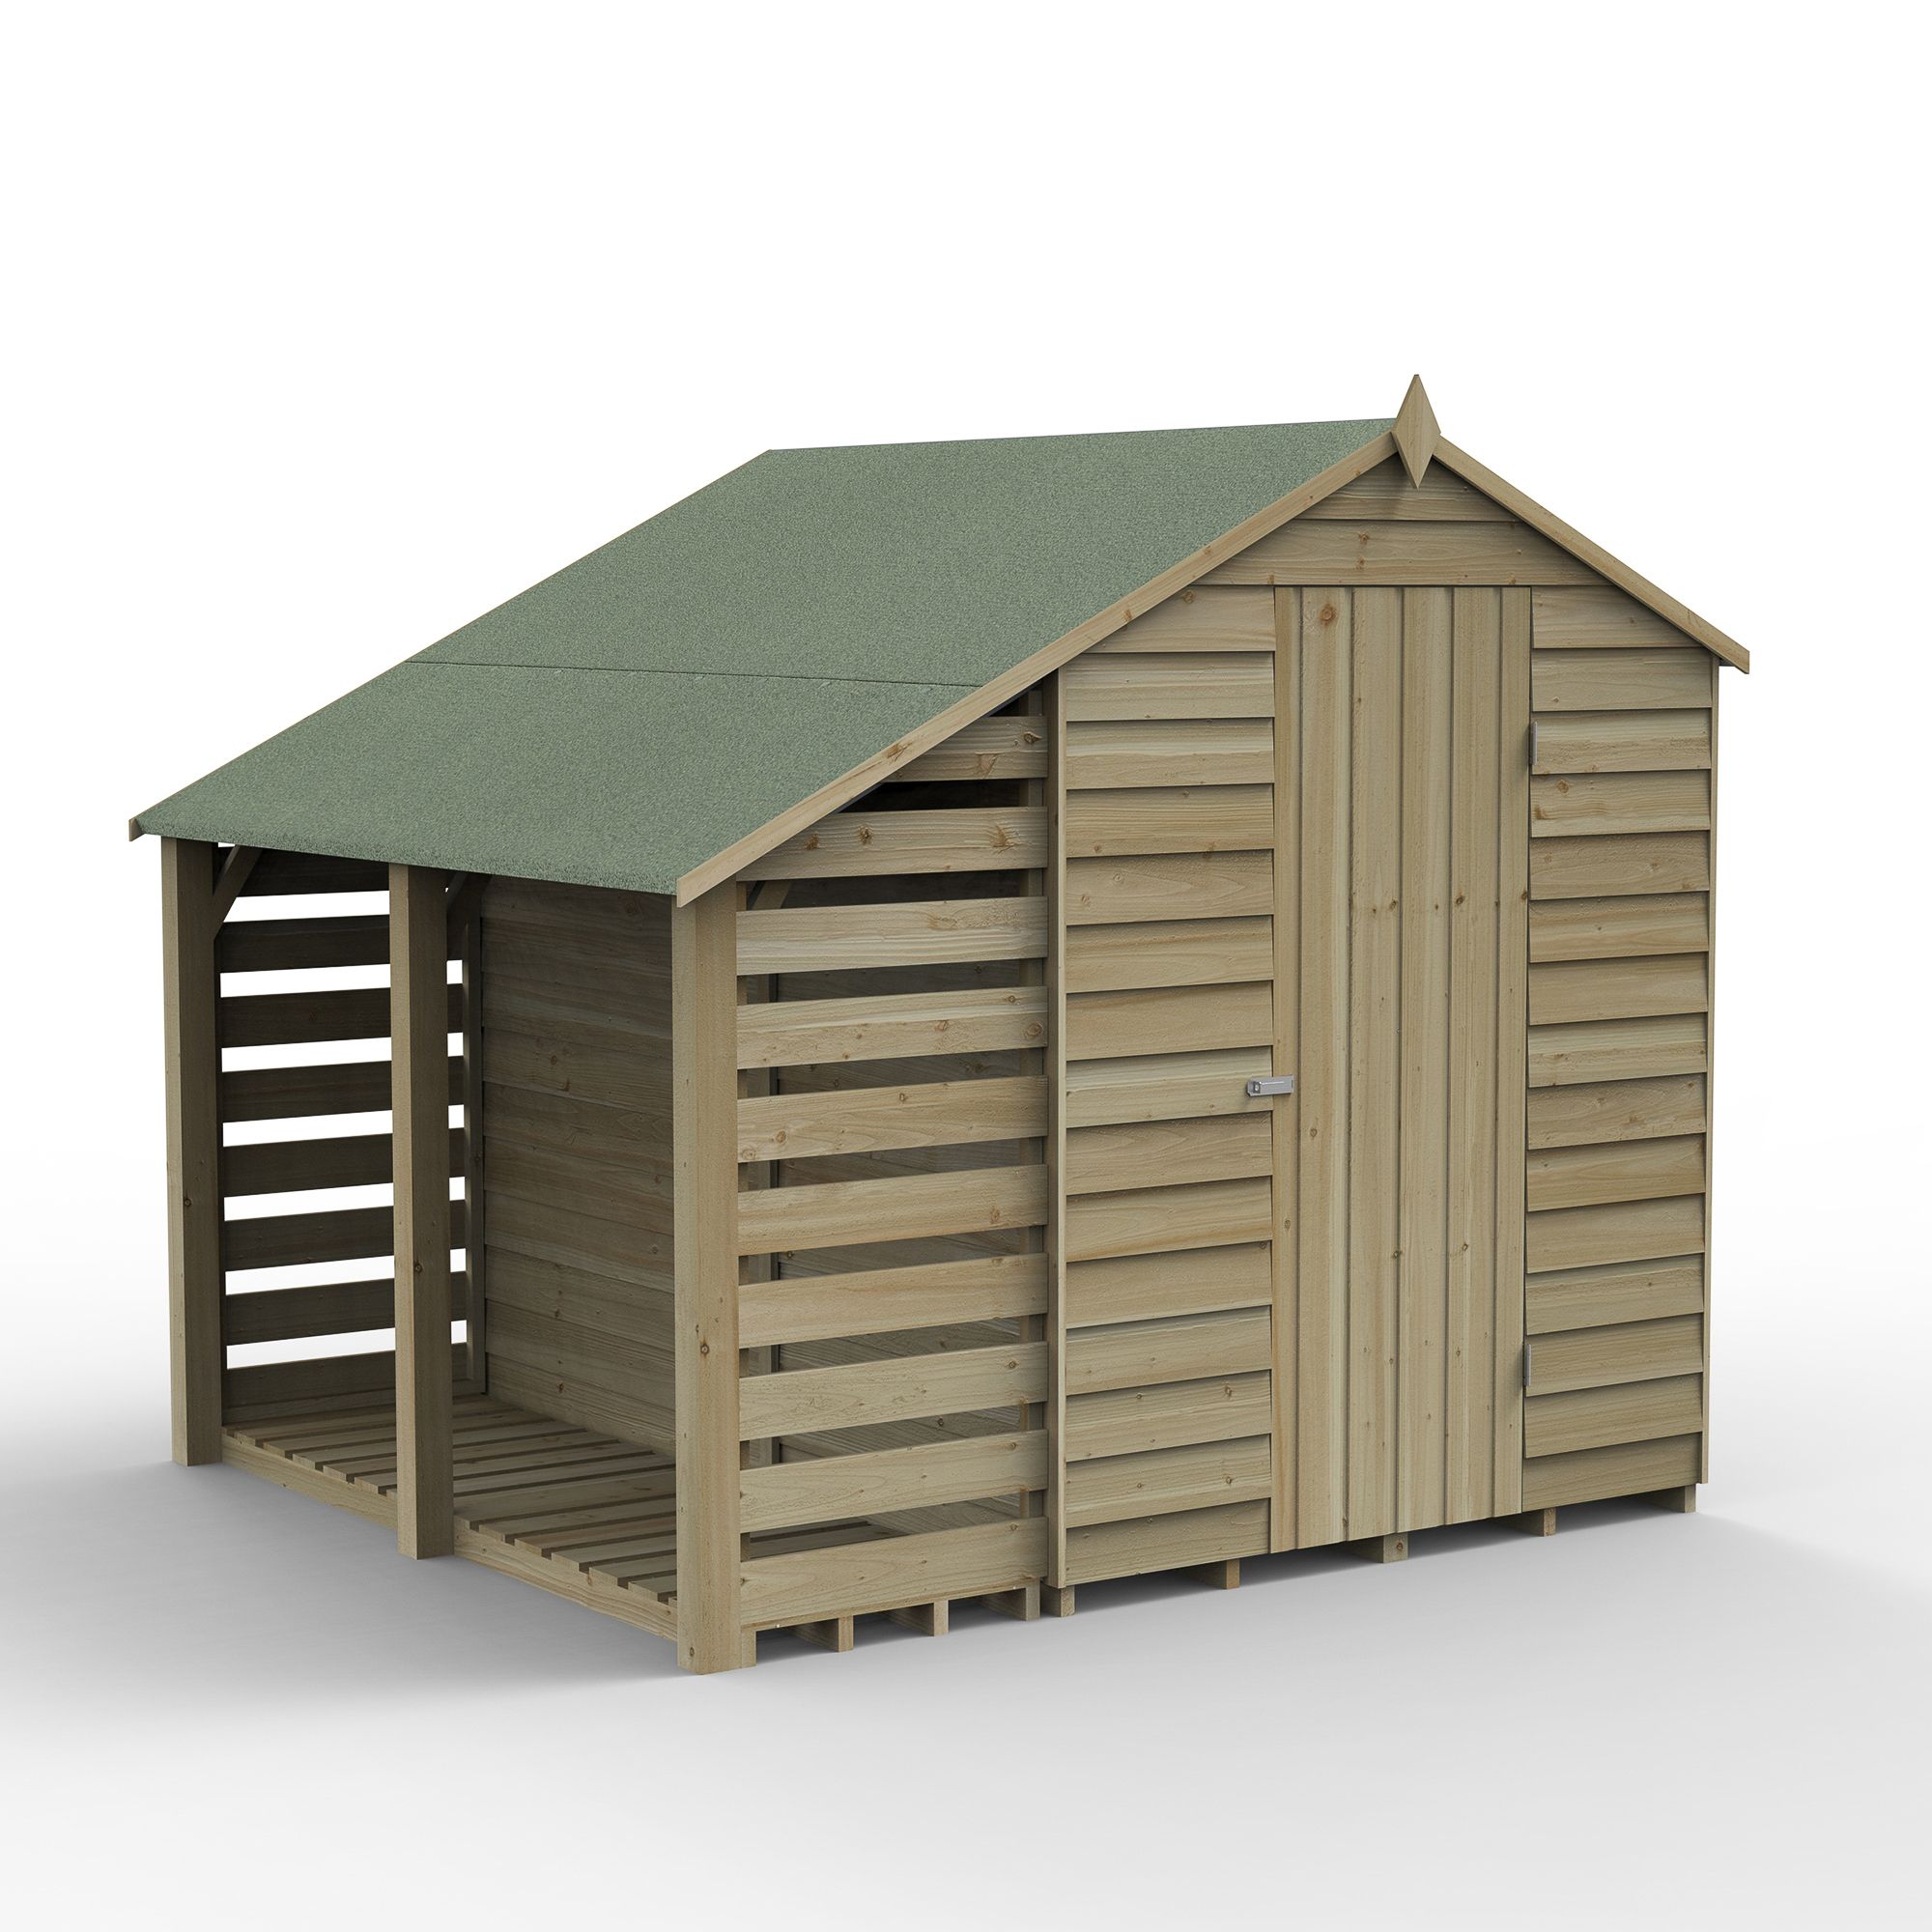 Forest Garden Shed 7x5 ft Apex Wooden Shed with floor & 2 windows - Assembly service included